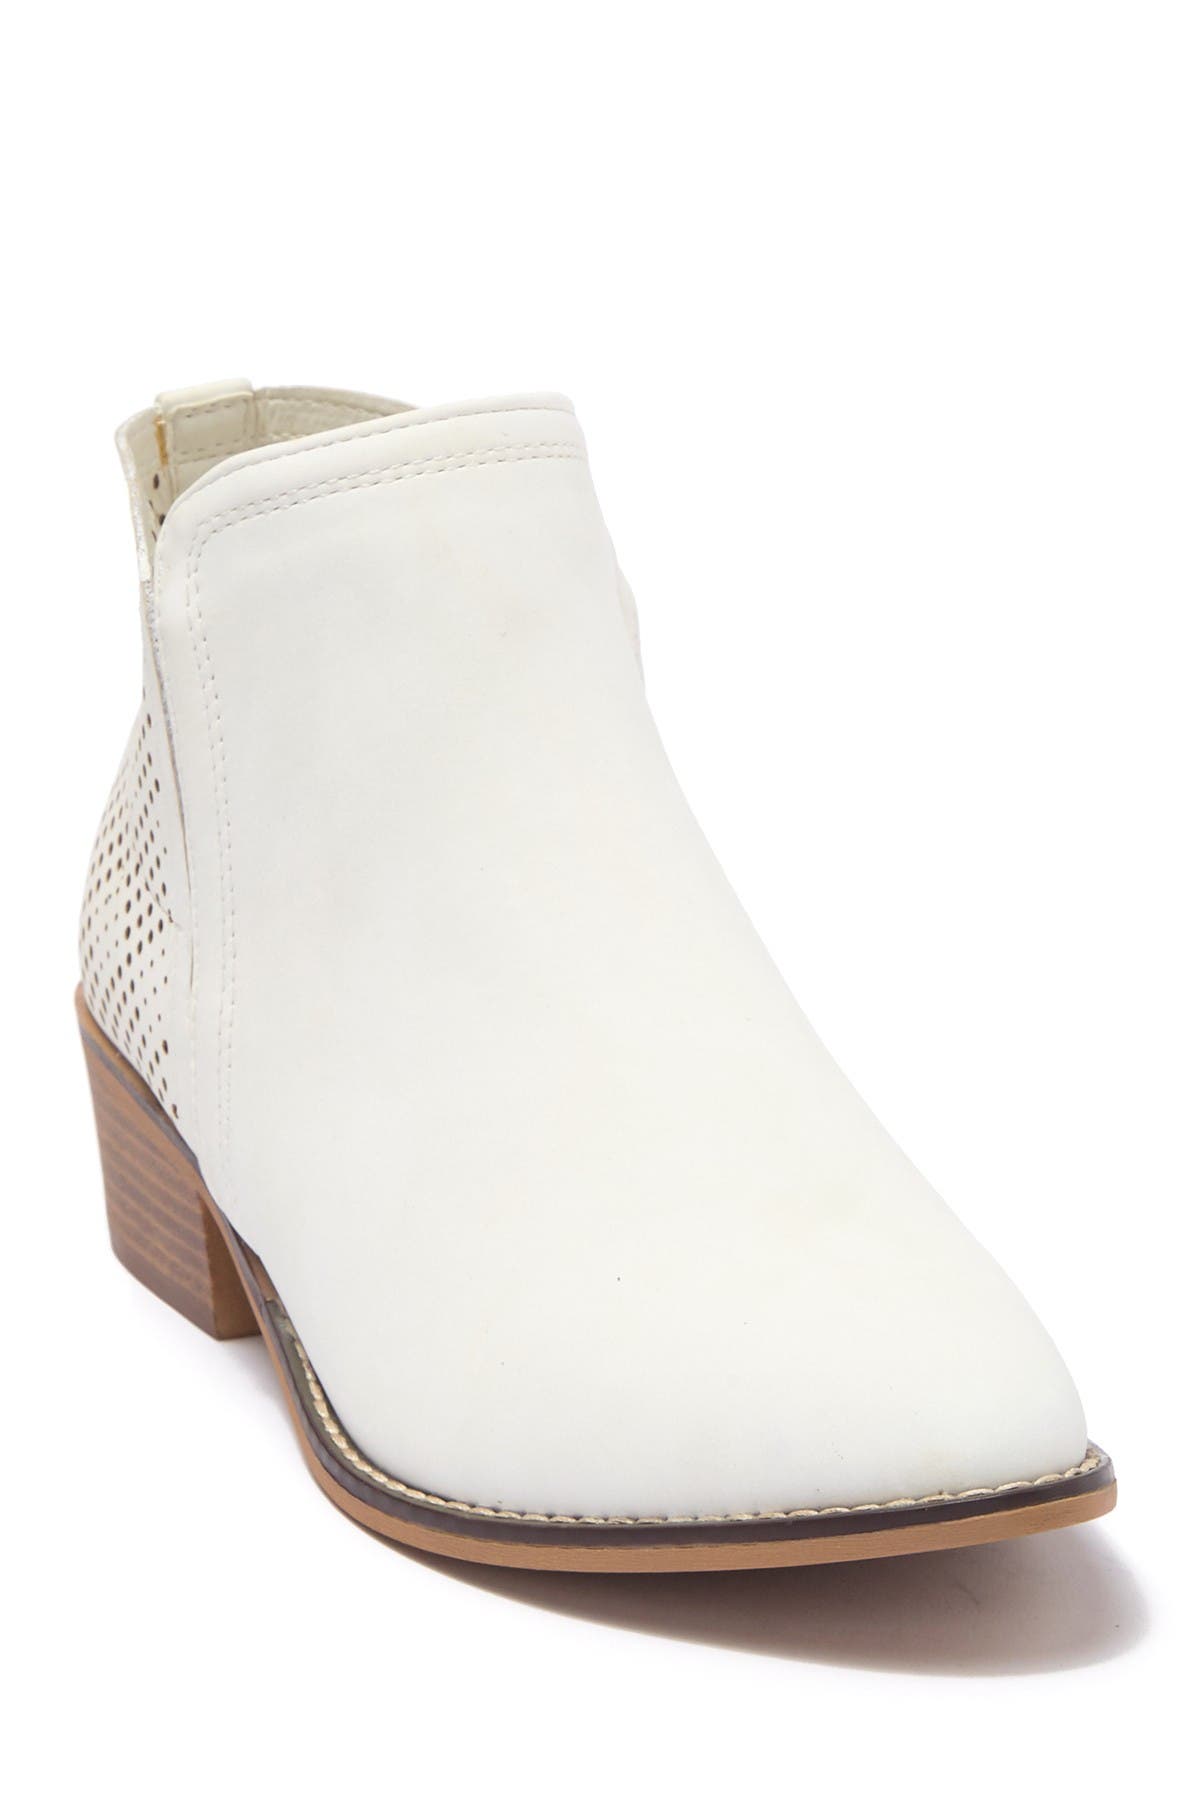 madden girl perforated booties